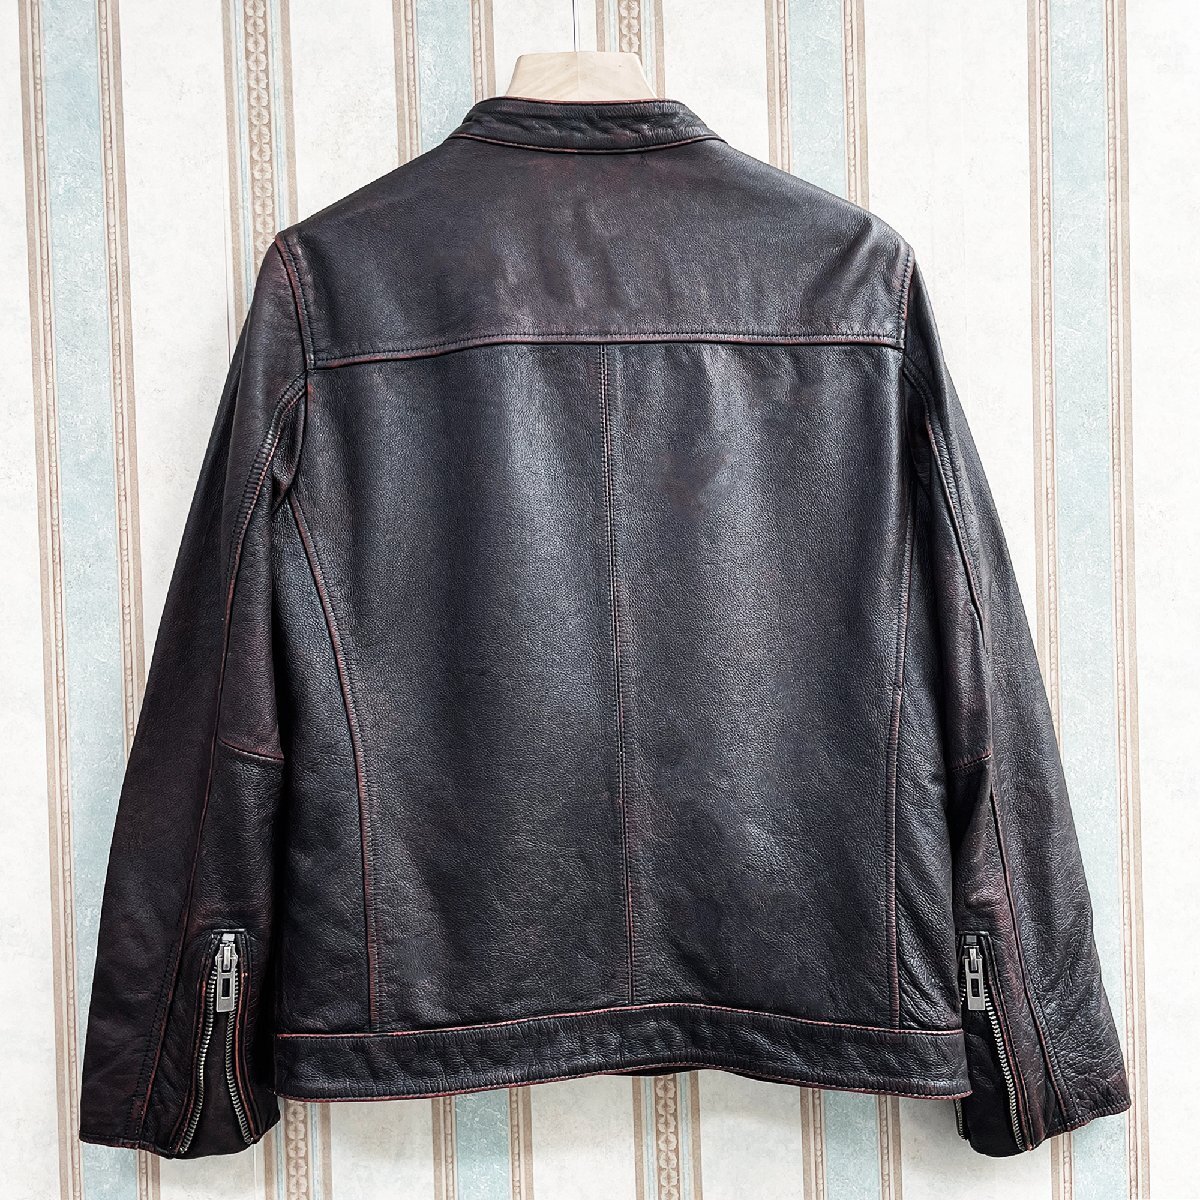  highest peak regular price 15 ten thousand FRANKLIN MUSK* America * New York departure leather jacket Rider's leather jacket top class cow leather fine quality original leather stylish size 2